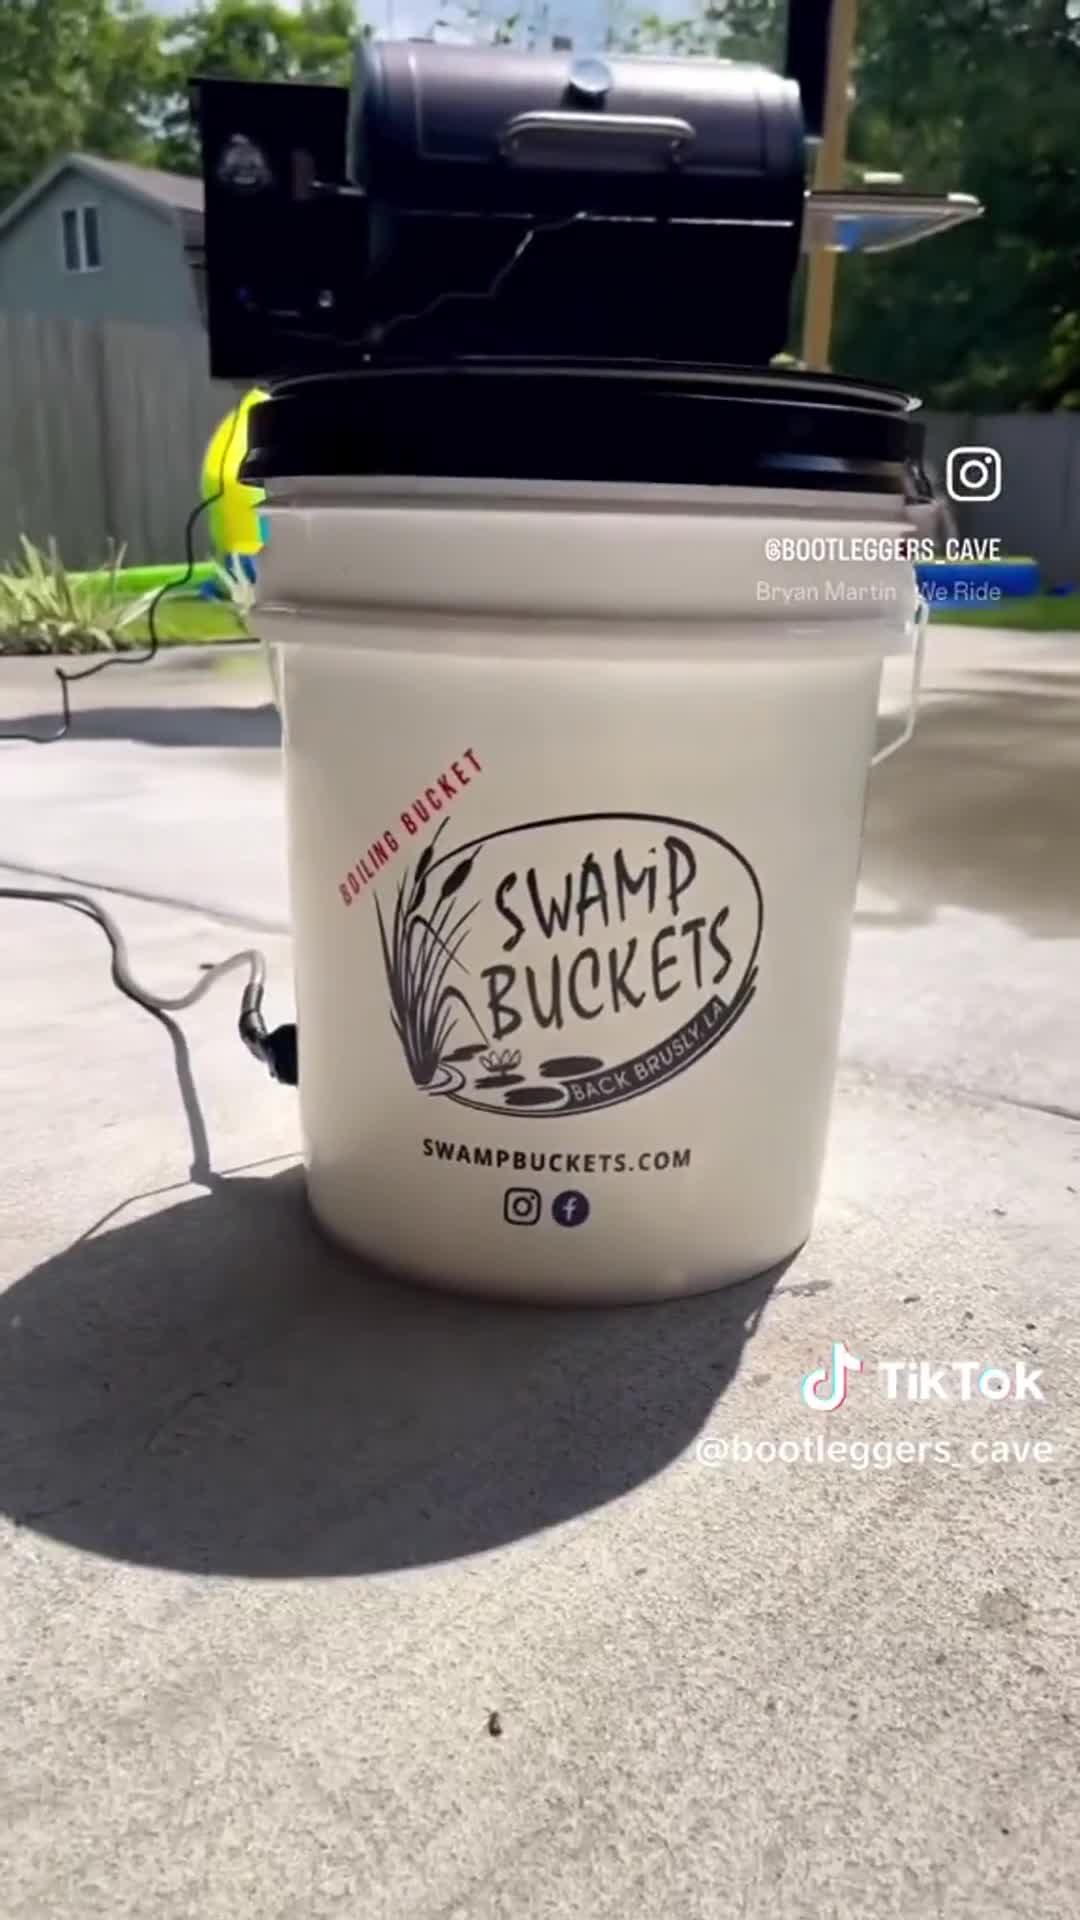 Instructions + Safety — Swamp Buckets